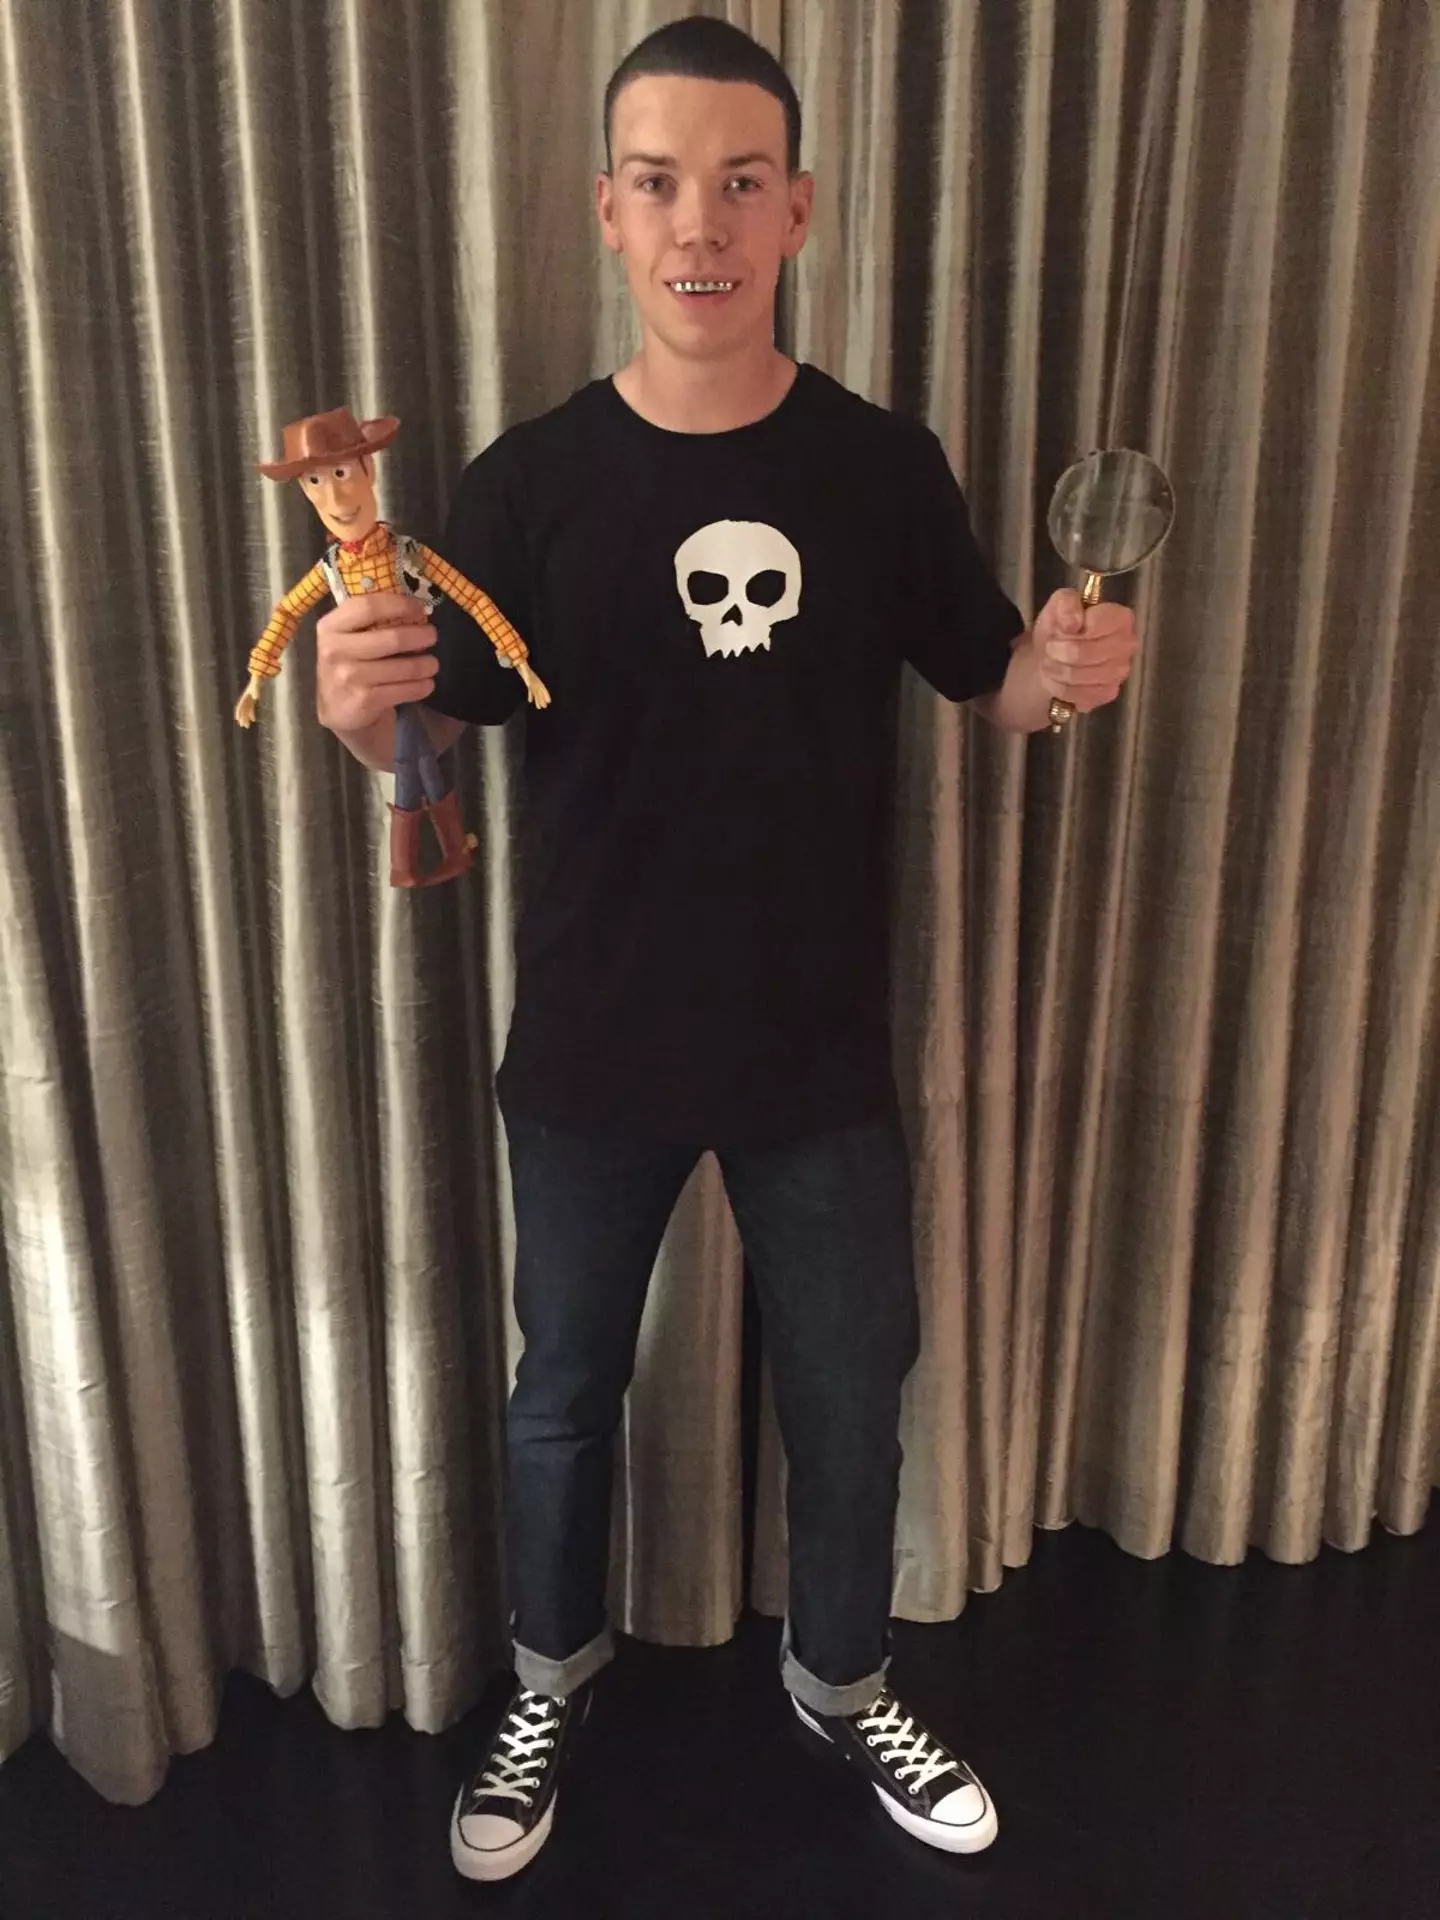 Will Poulter dressed up as Sid for Halloween - but he did it for a good cause.